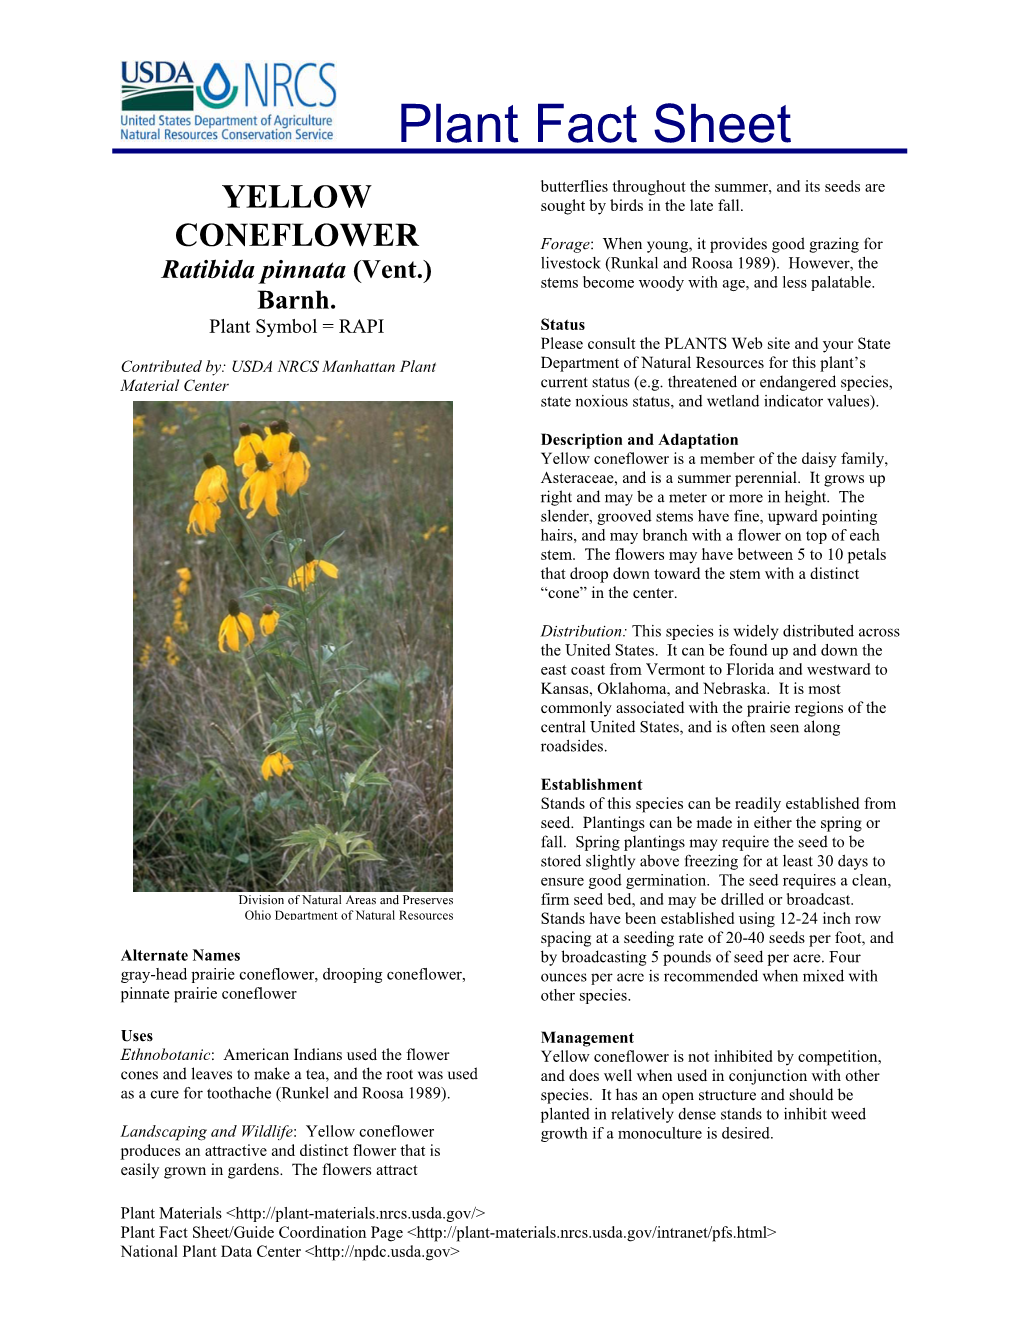 Yellow Coneflower Is a Member of the Daisy Family, Asteraceae, and Is a Summer Perennial